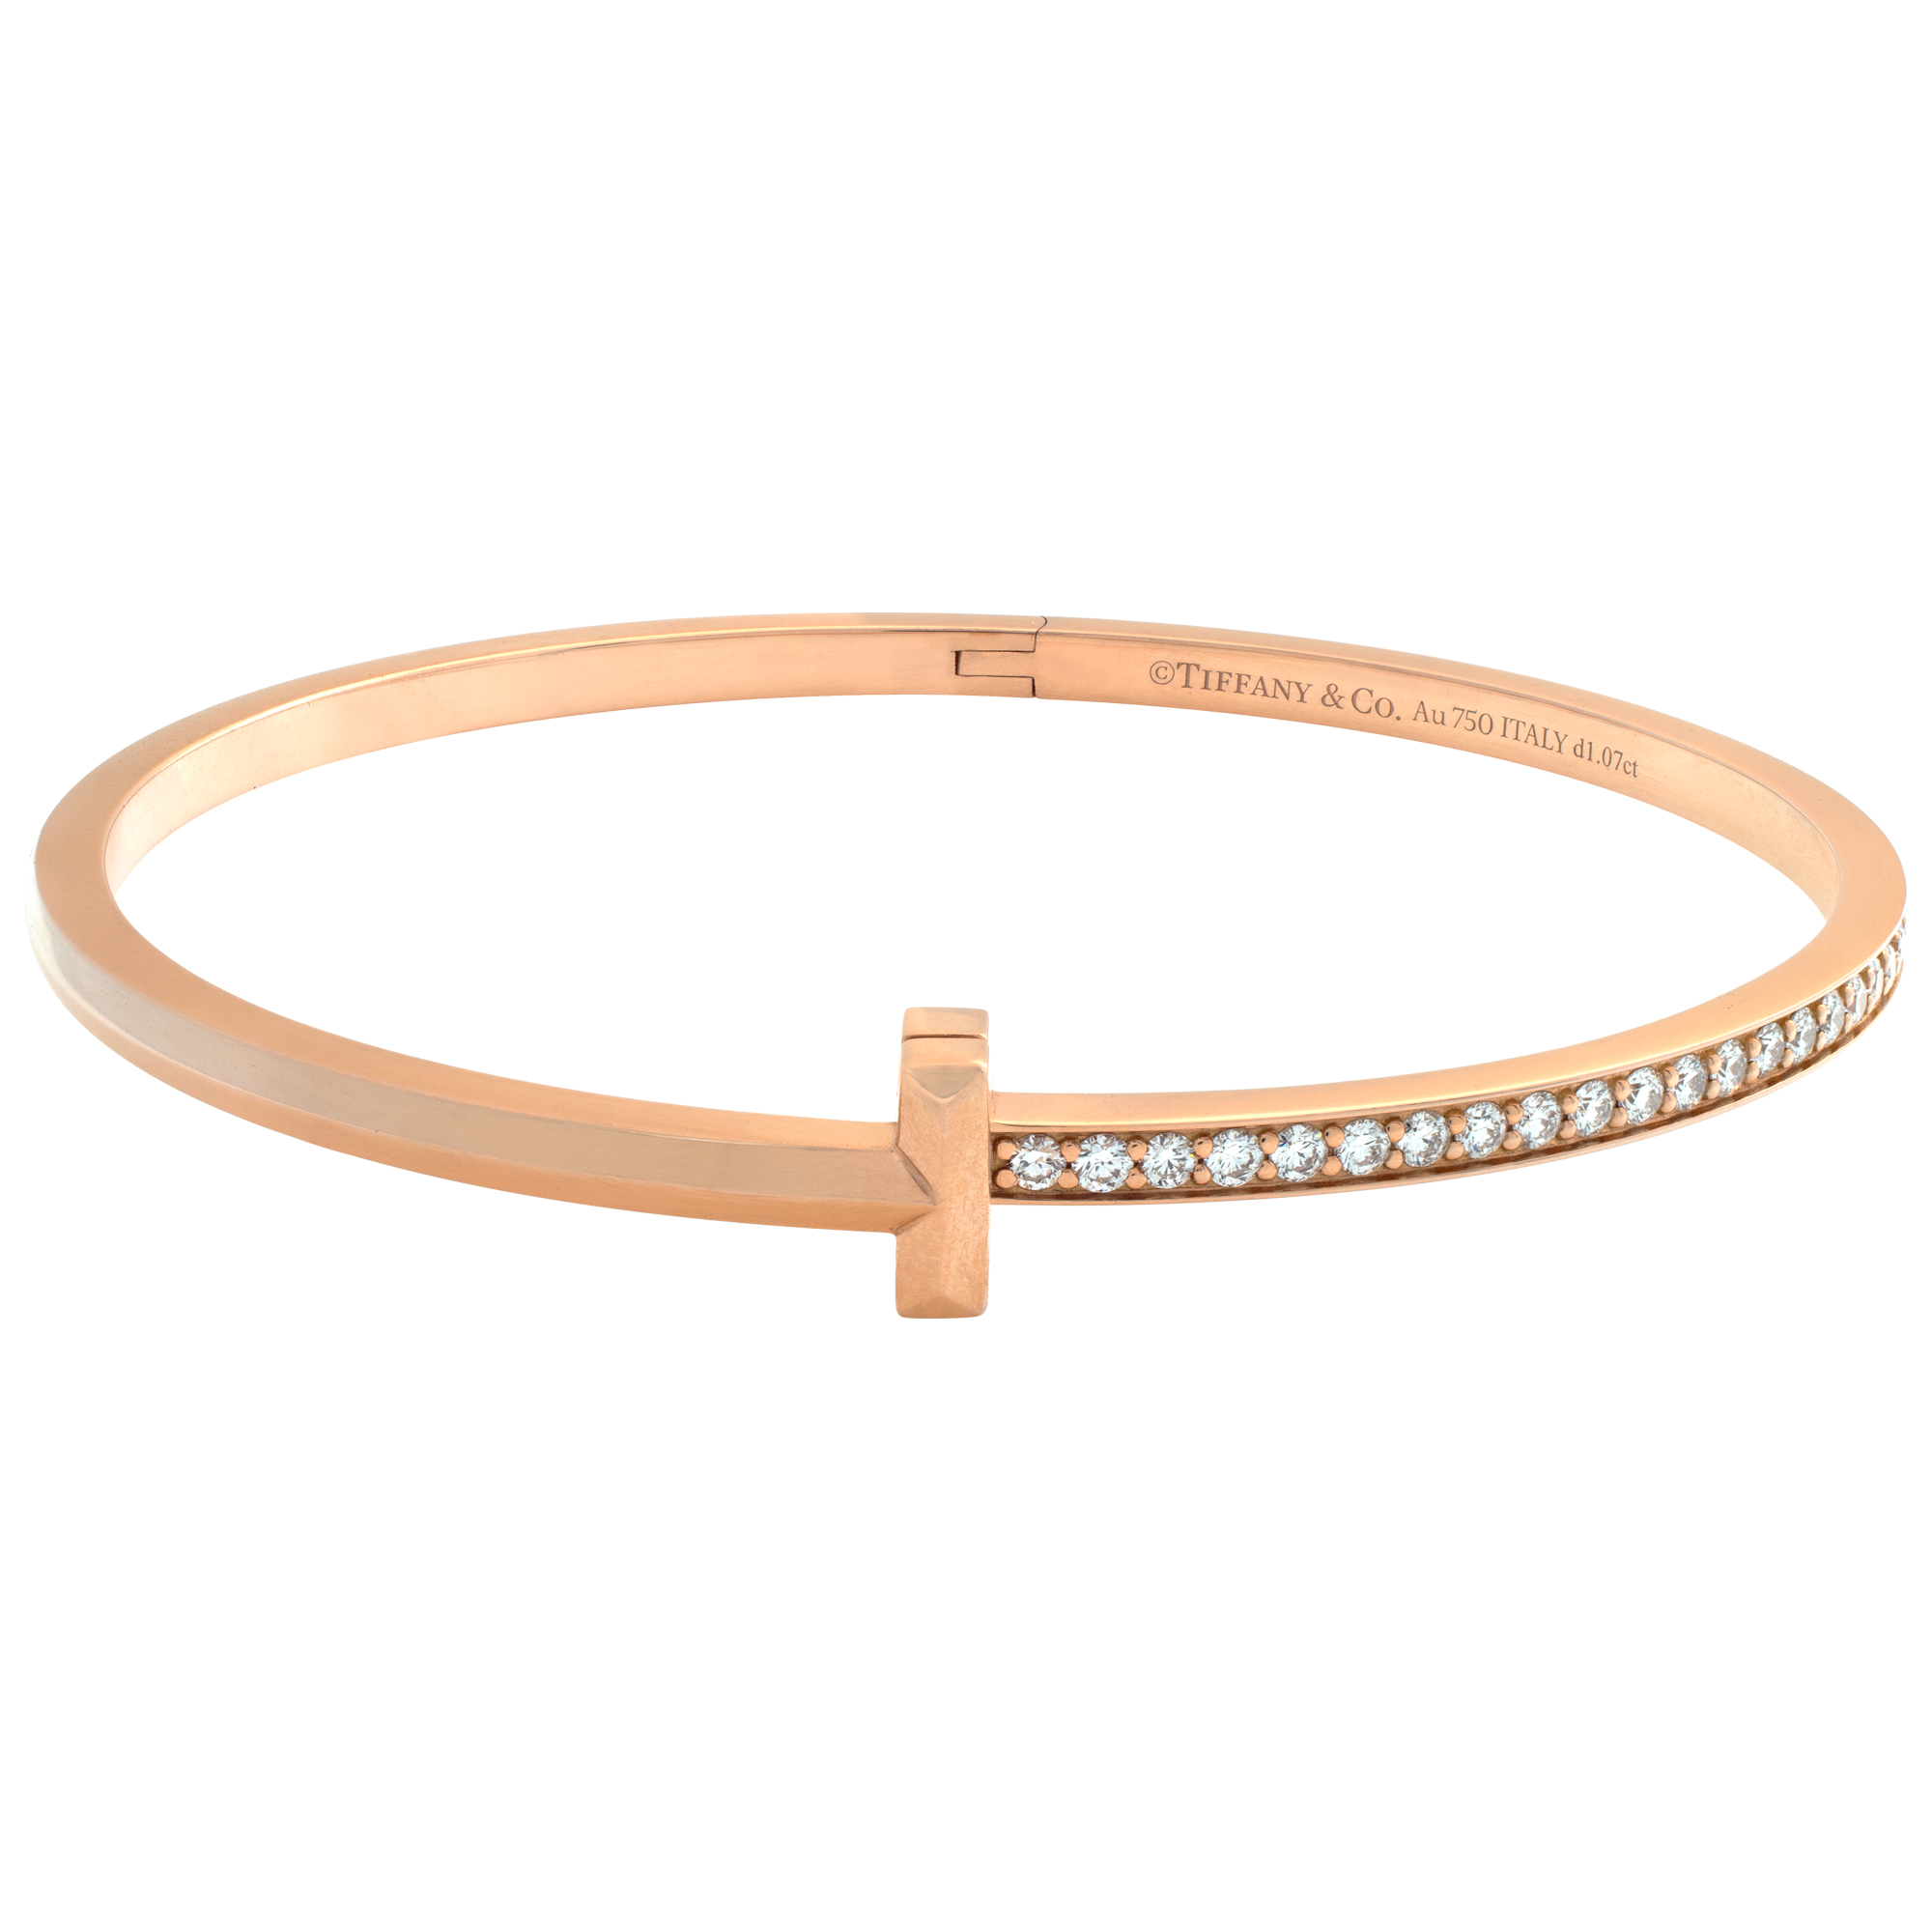 Tiffany & Co T1 T collection, hinged bangle in 18k rose gold with 1.07 carat round brilliant diamonds image 1